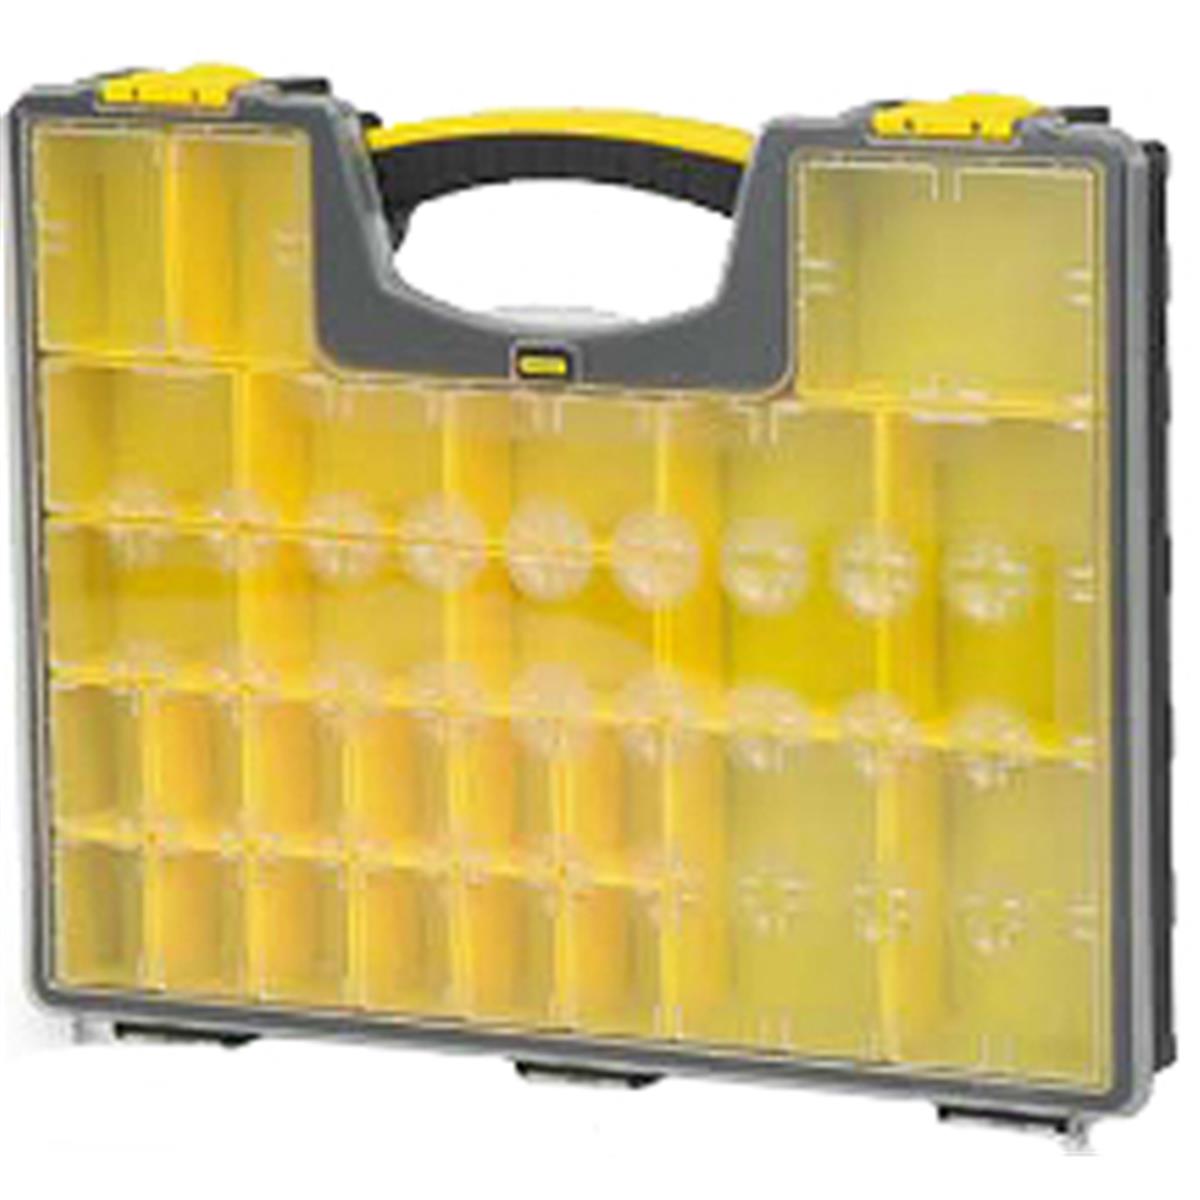 Picture of Stanley Bostitch STST14710 Pro 10 Compartment Organizer